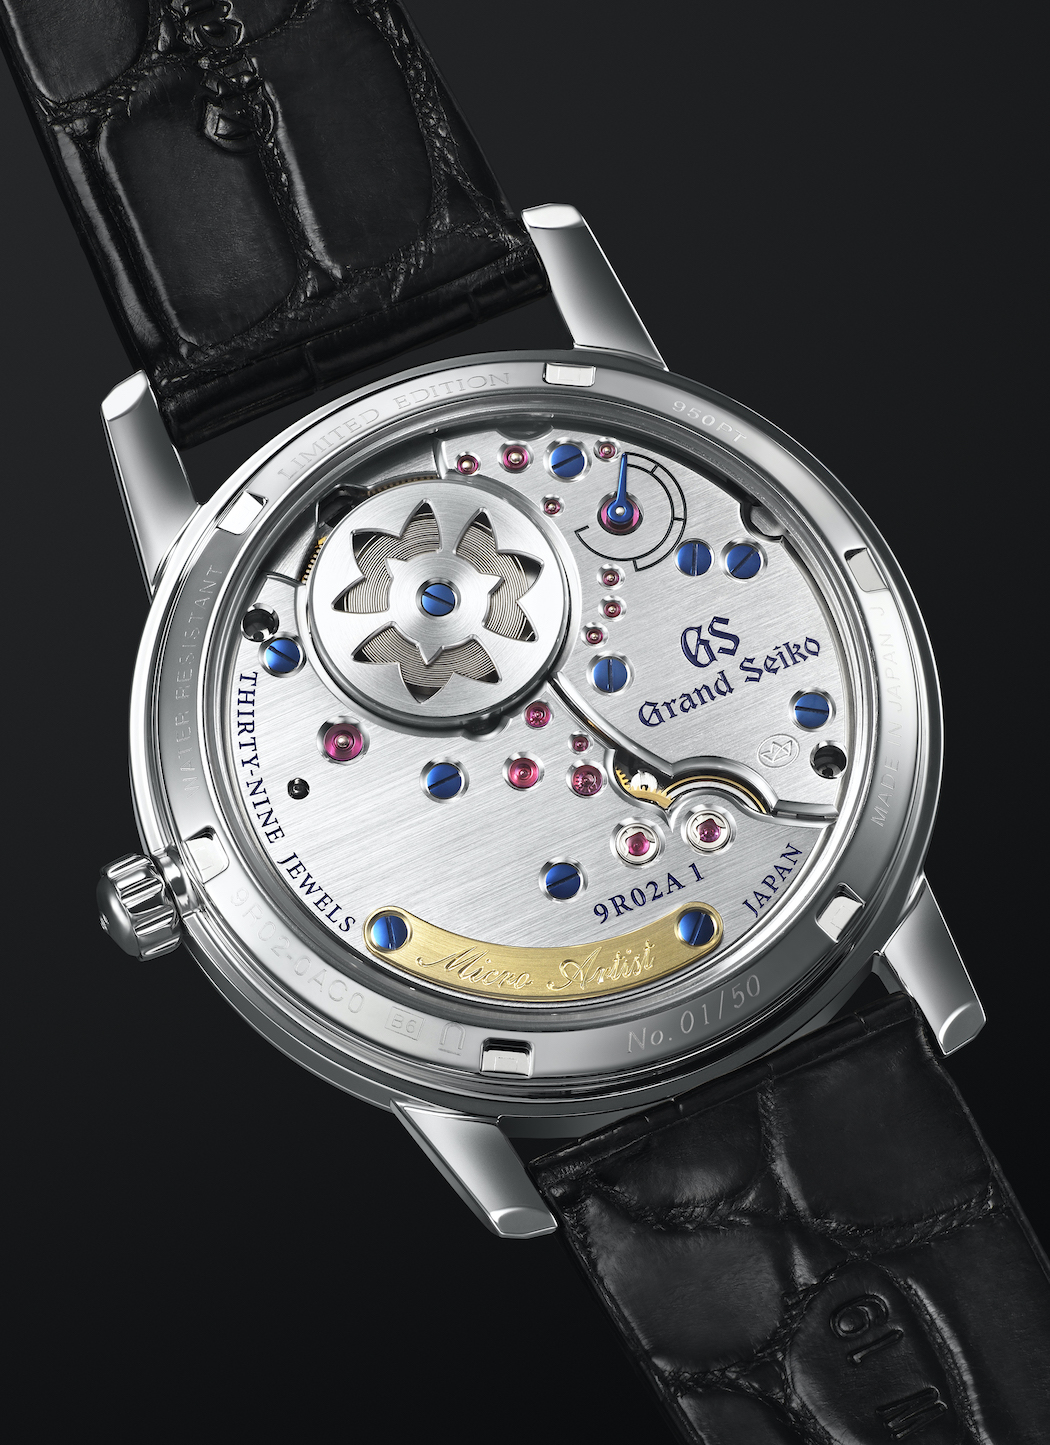 TimeZone : Industry News » INDUSTRY NEWS - Grand Seiko Opens Boutiques in  New York and Miami